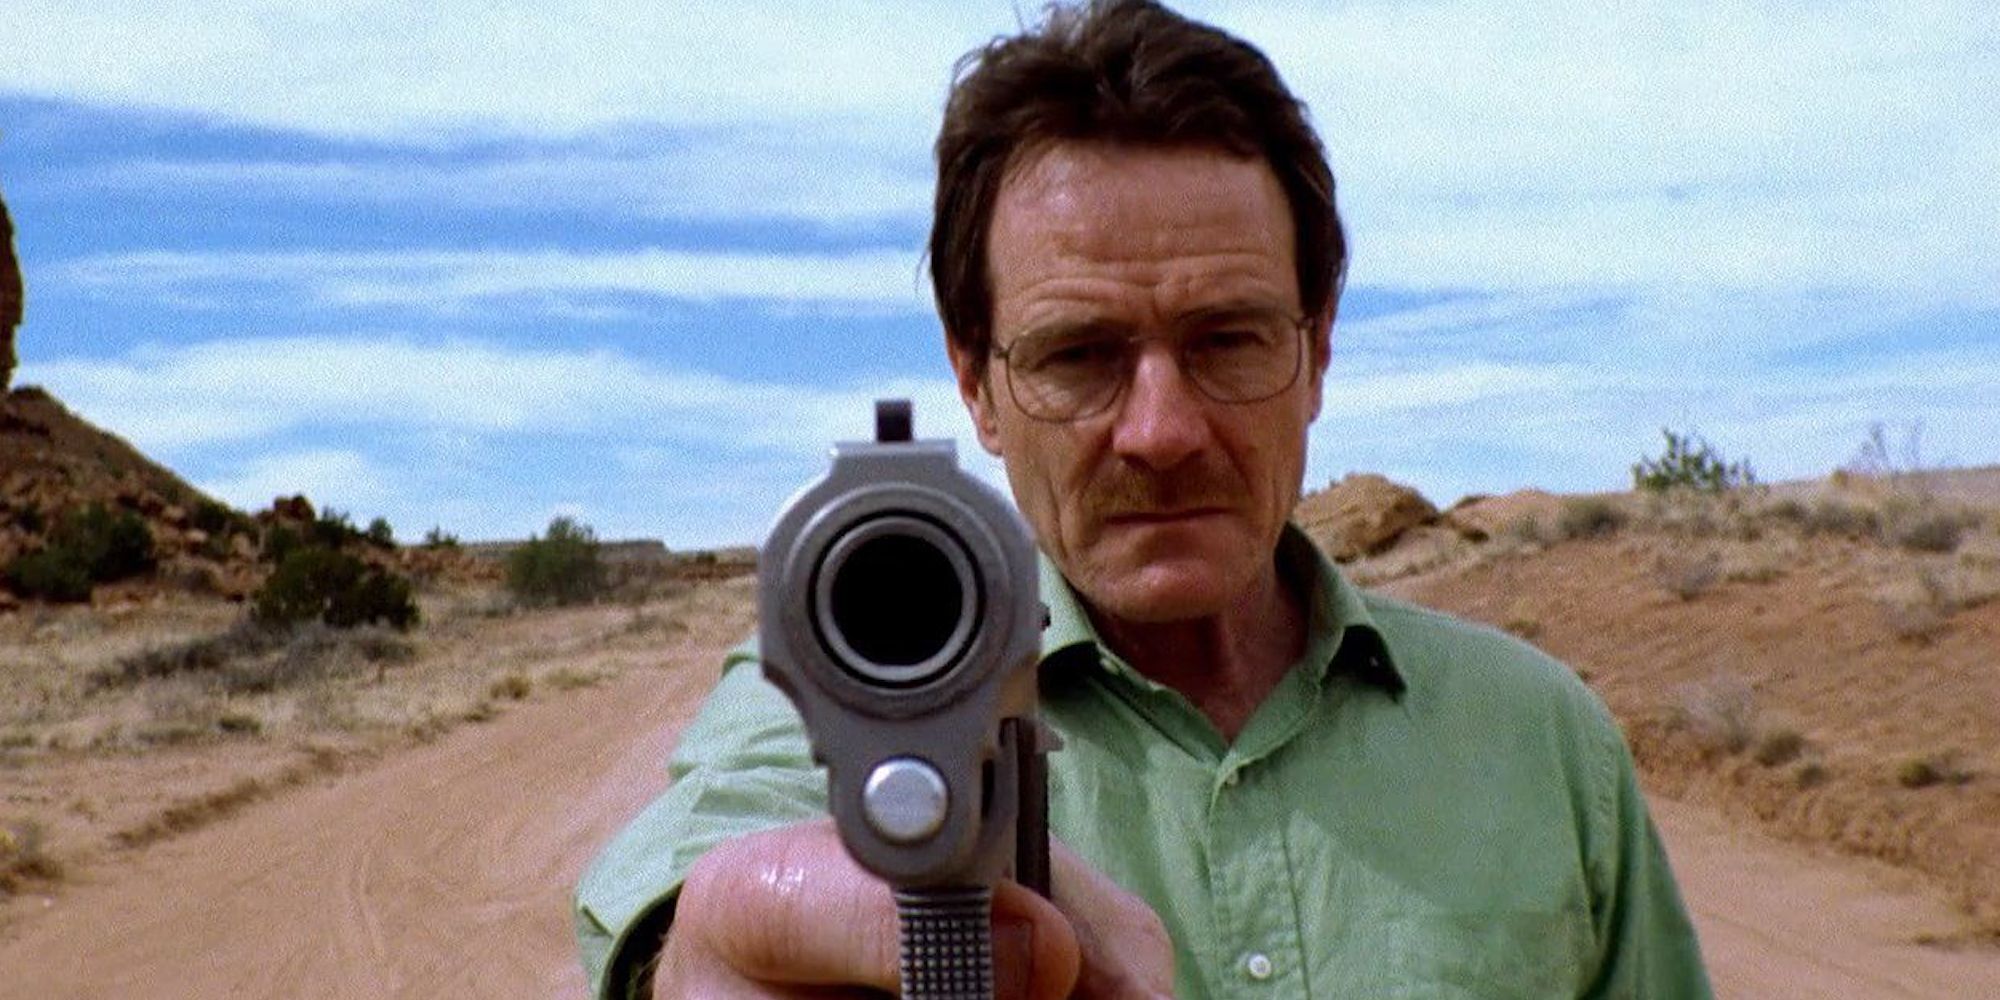 Bryan Cranston as Walter White pointing a gun at the camera in Breaking Bad